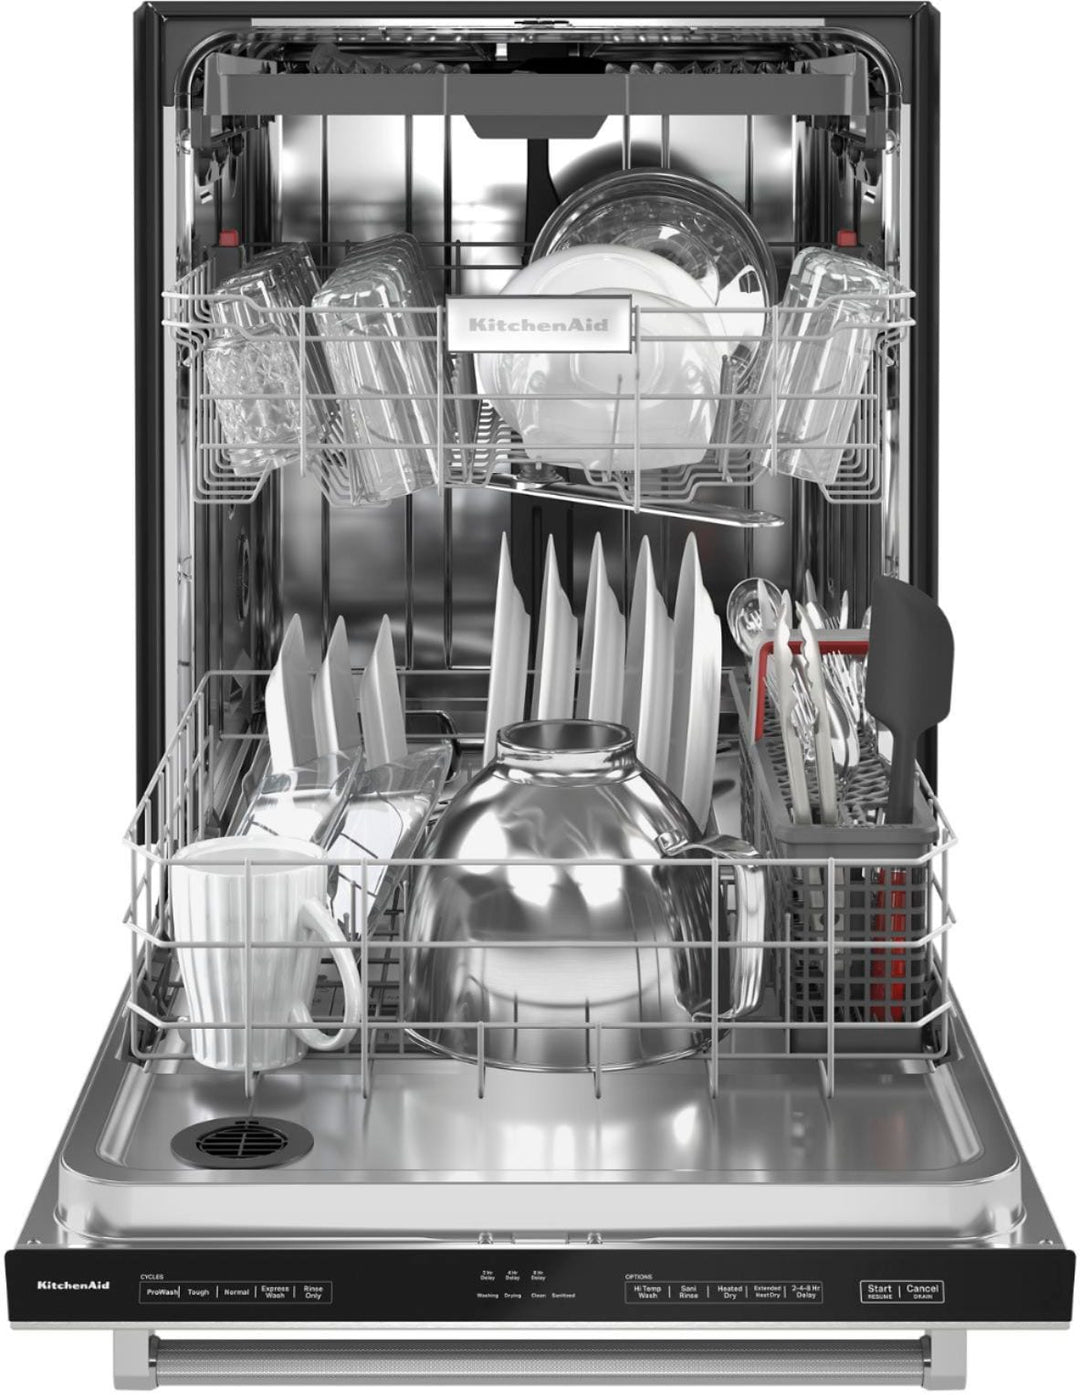 KitchenAid - 24" Top Control Built-In Dishwasher with Stainless Steel Tub, PrintShield Finish, 3rd Rack, 39 dBA - Stainless Steel with PrintShield Finish_7